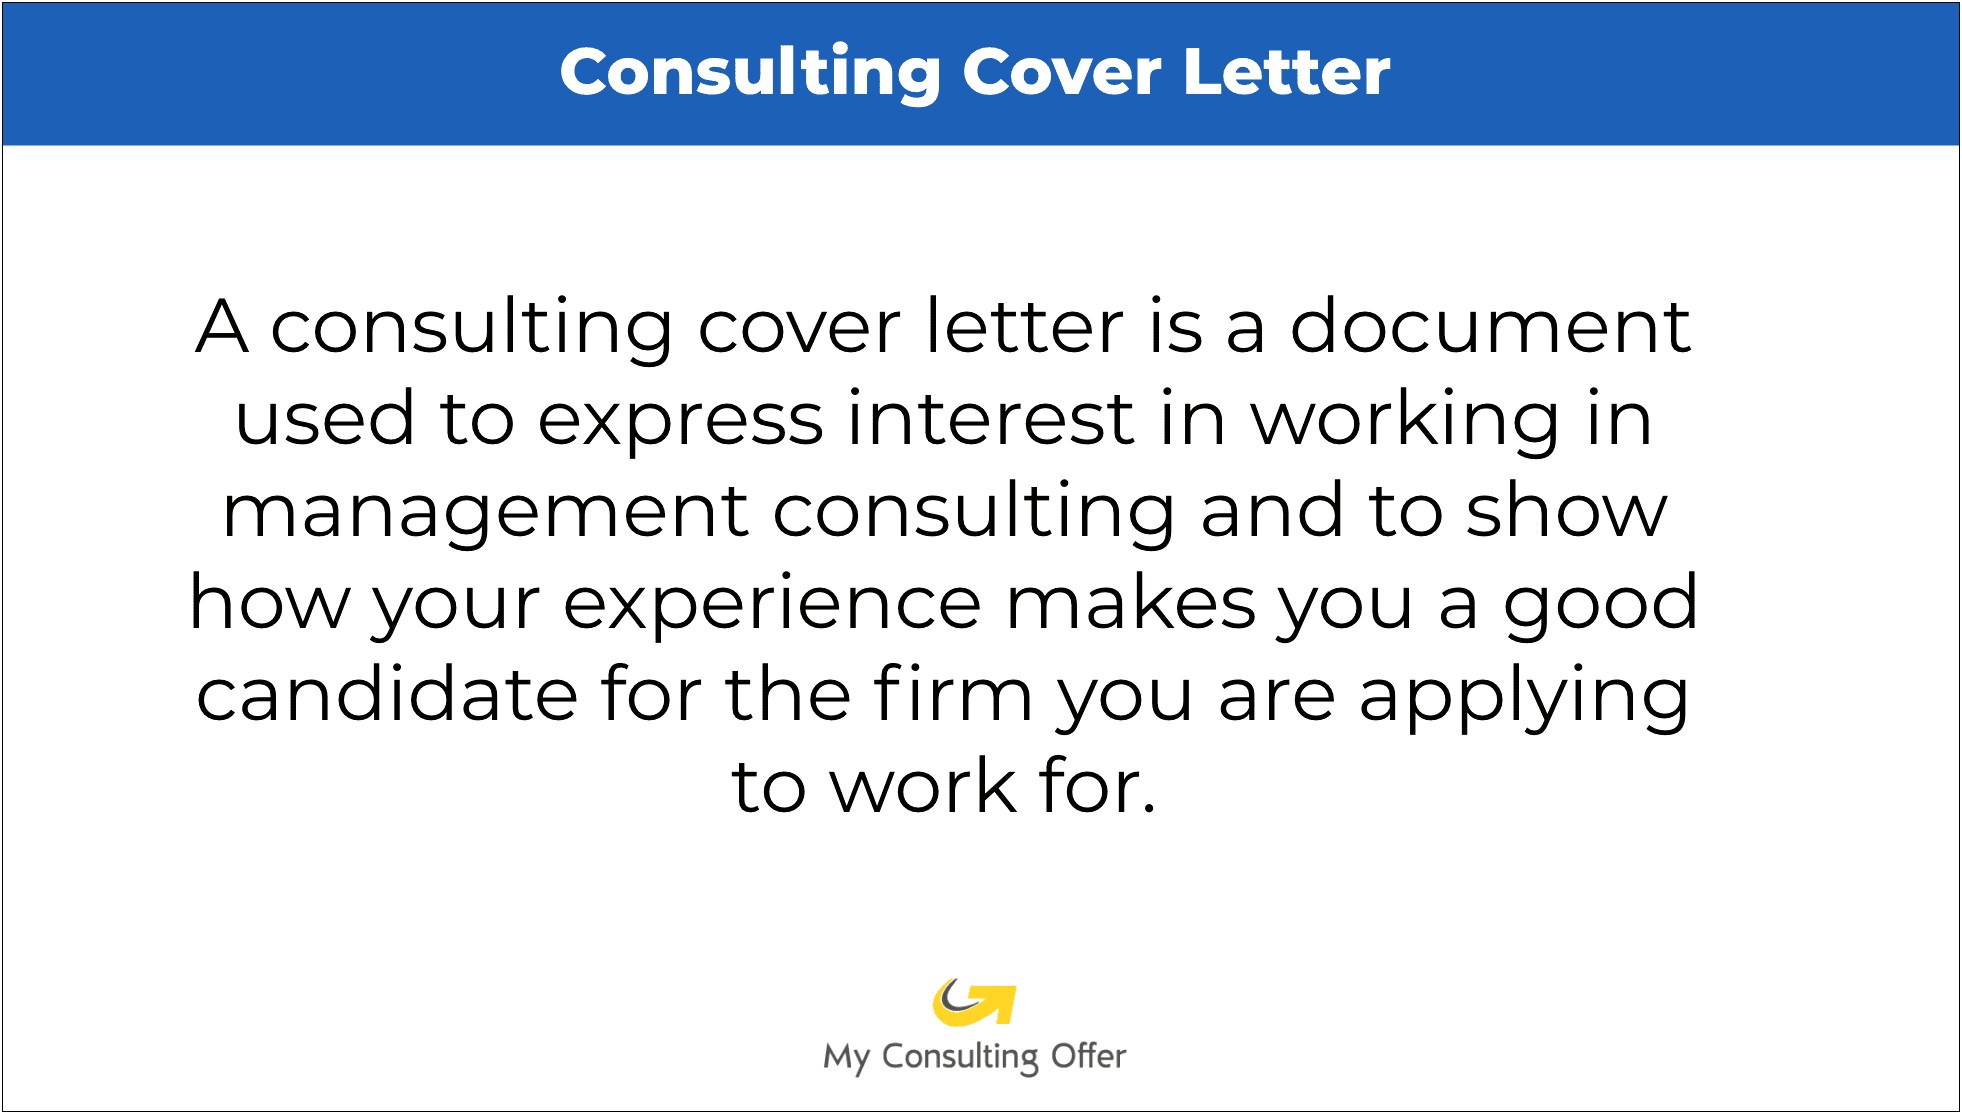 Do You Give Letter Of Recommendation With Resume